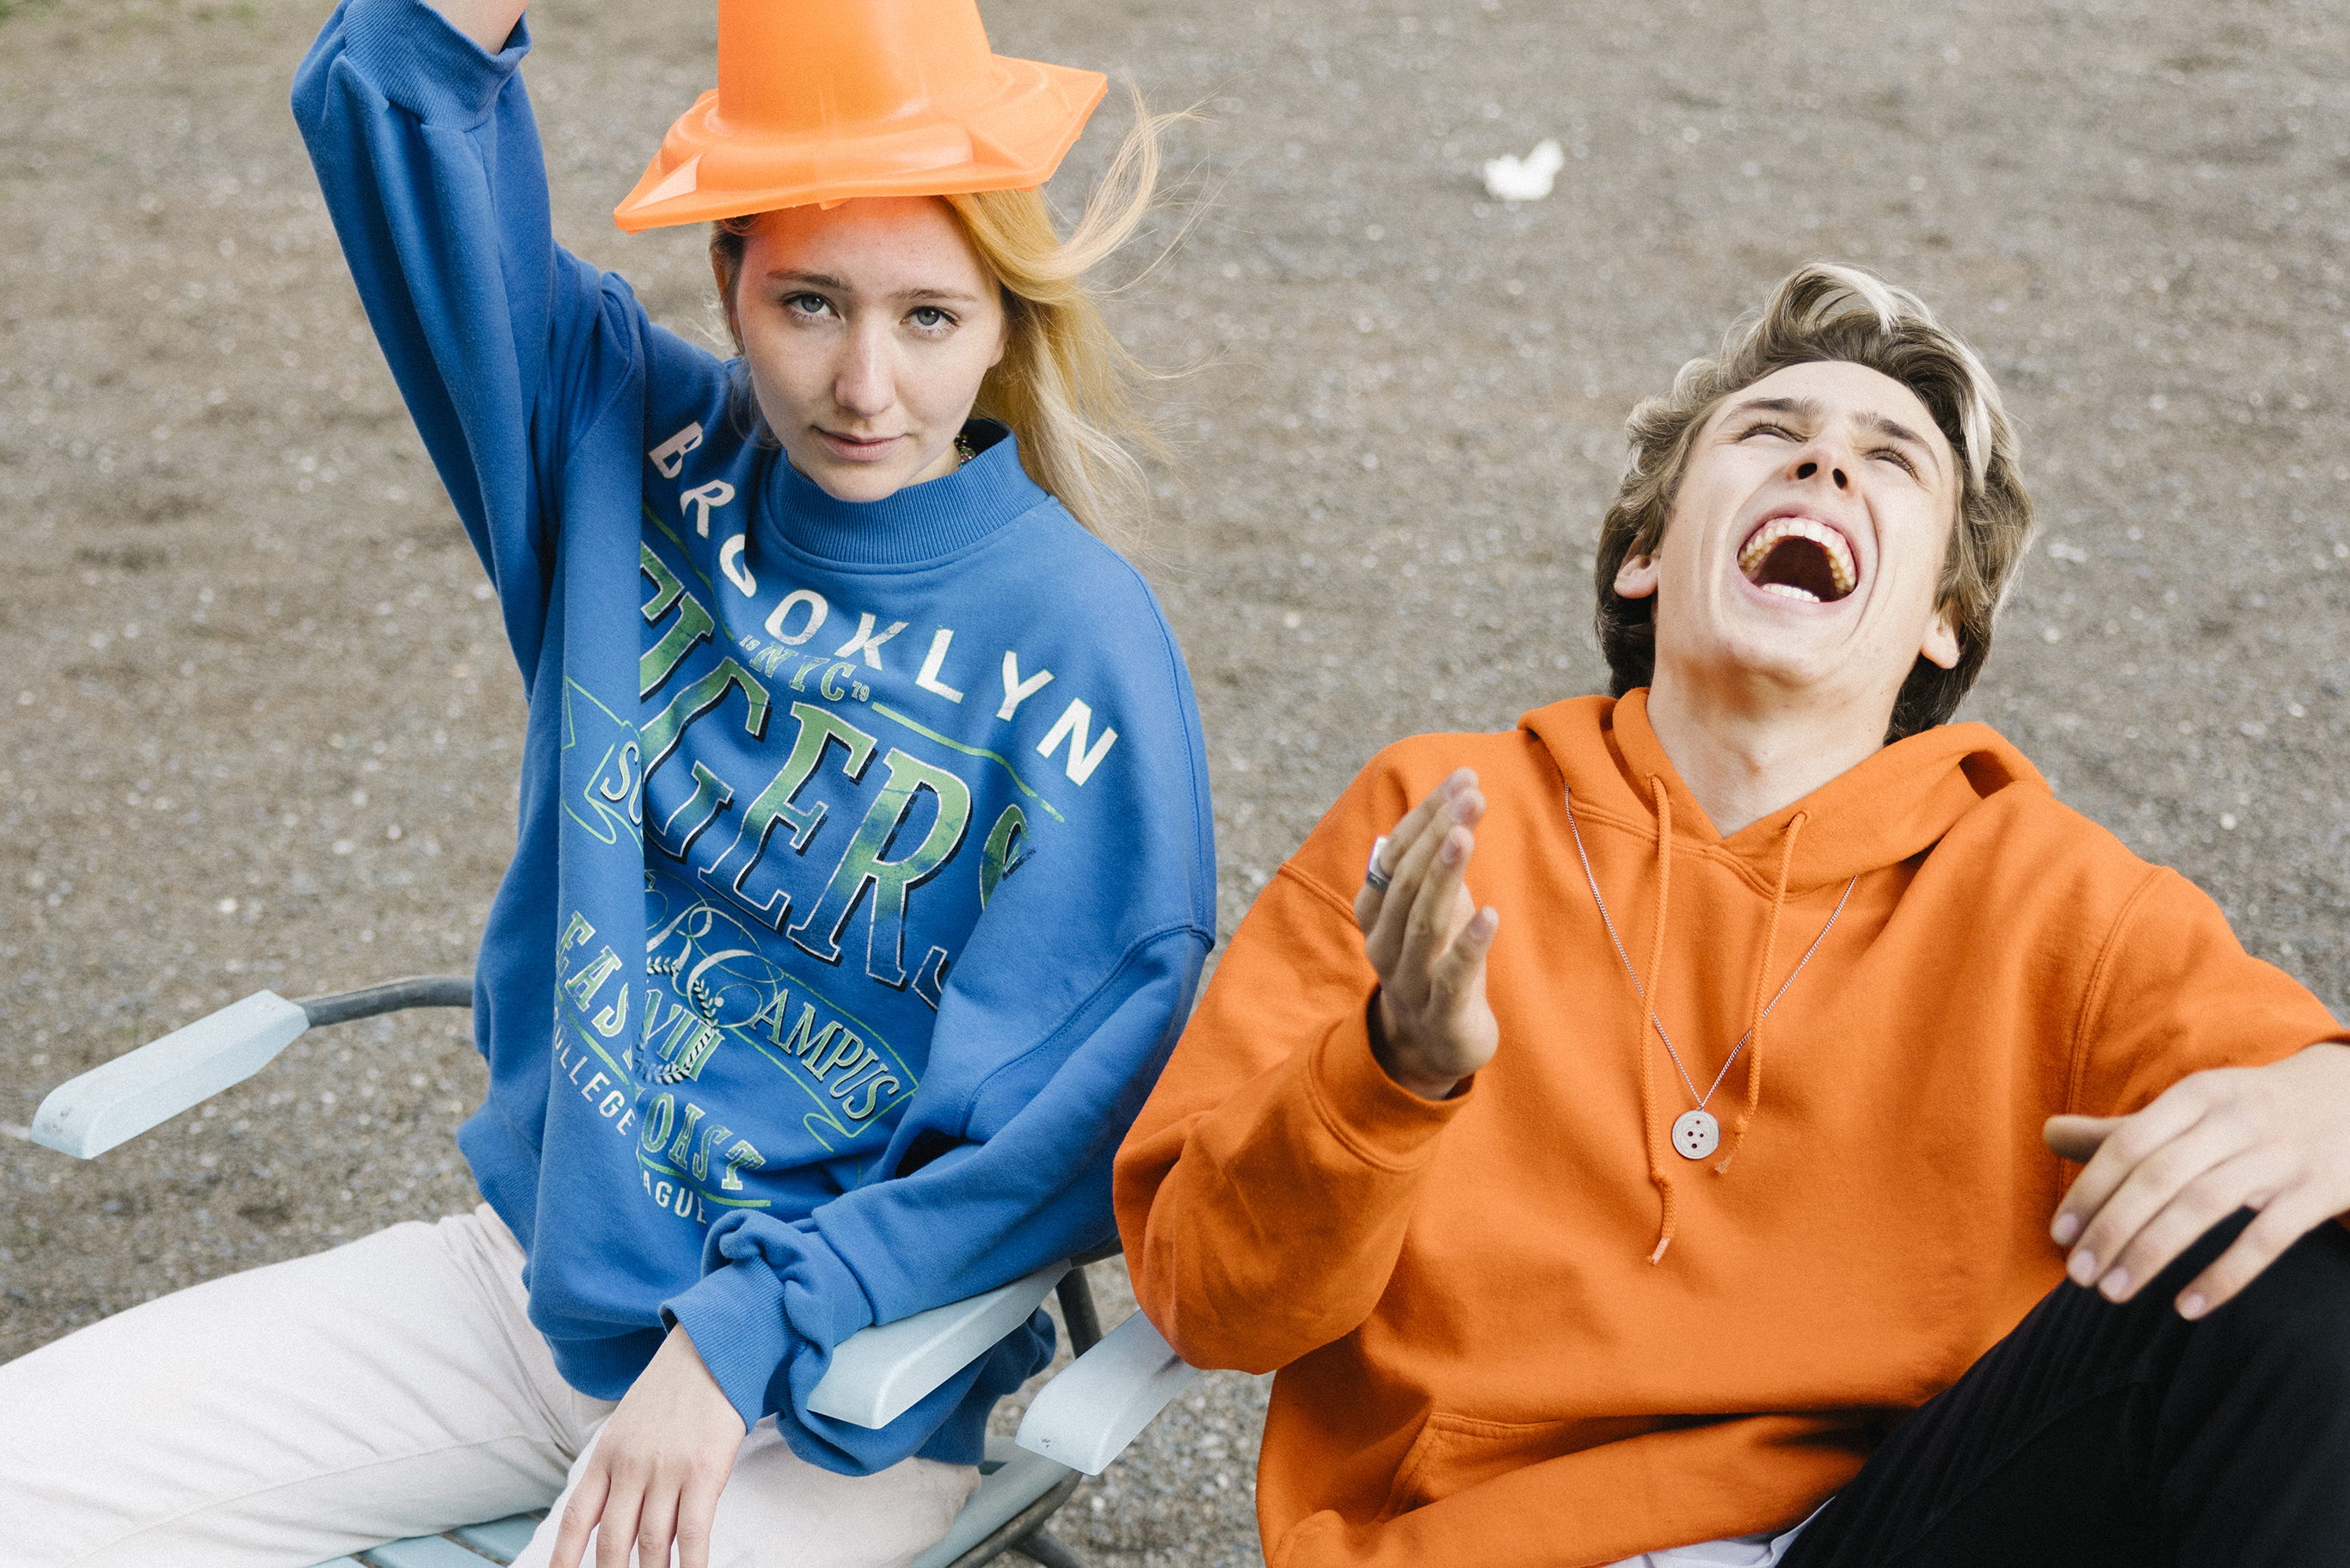 A youth laughs hysterically while looking up at the sky, while a youth looks into the camera while wearing a traffic cone as a hat.